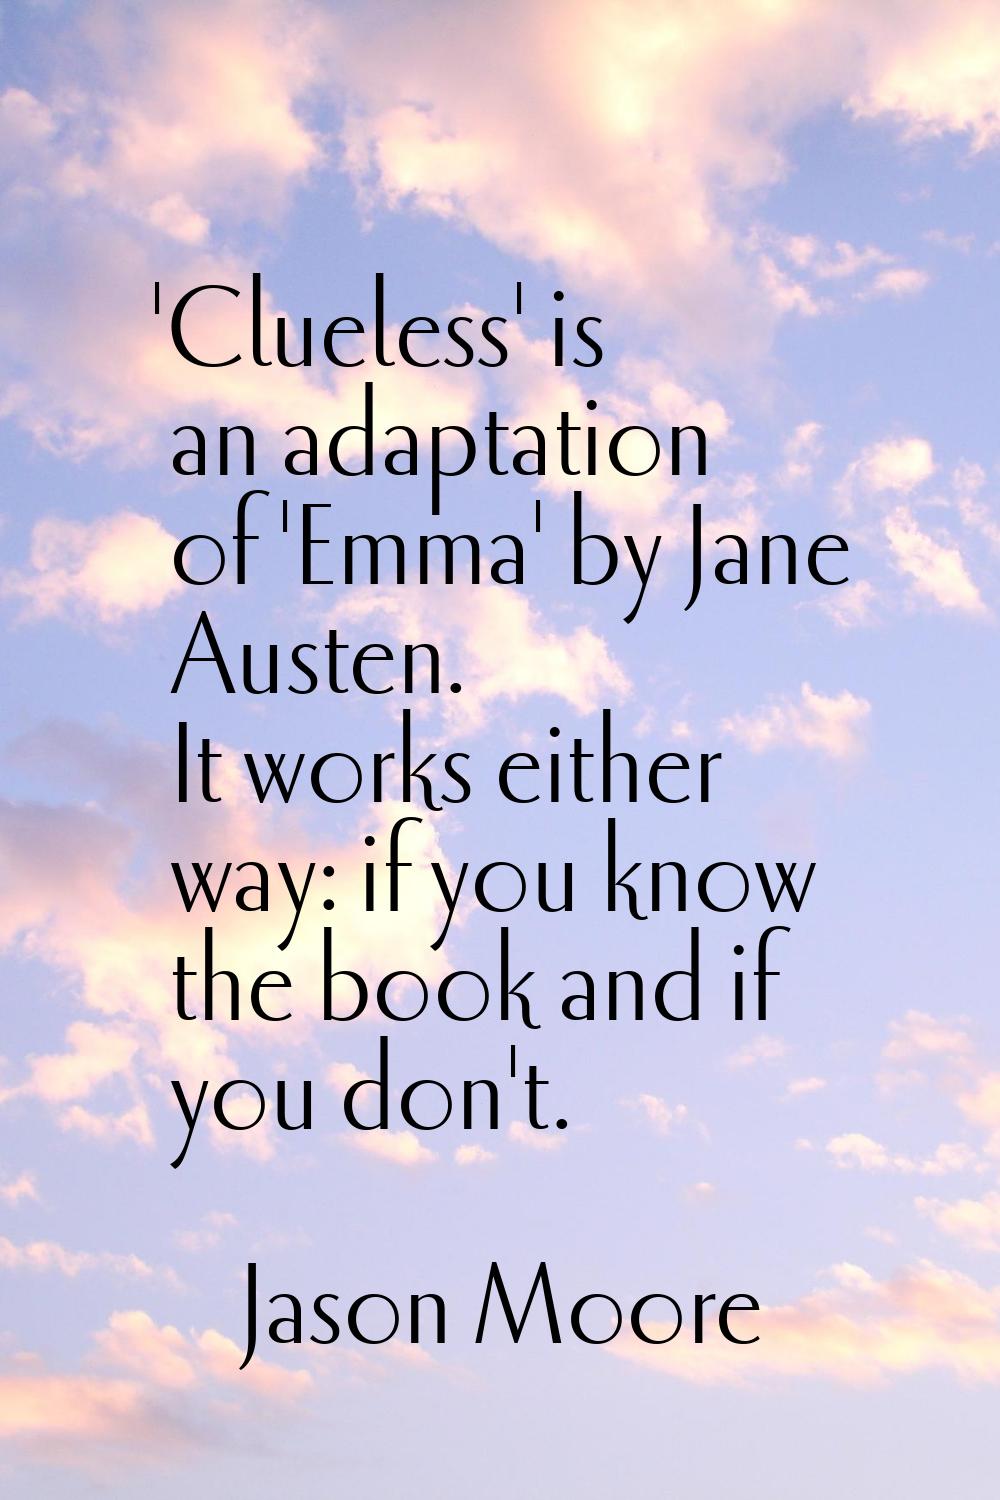 'Clueless' is an adaptation of 'Emma' by Jane Austen. It works either way: if you know the book and